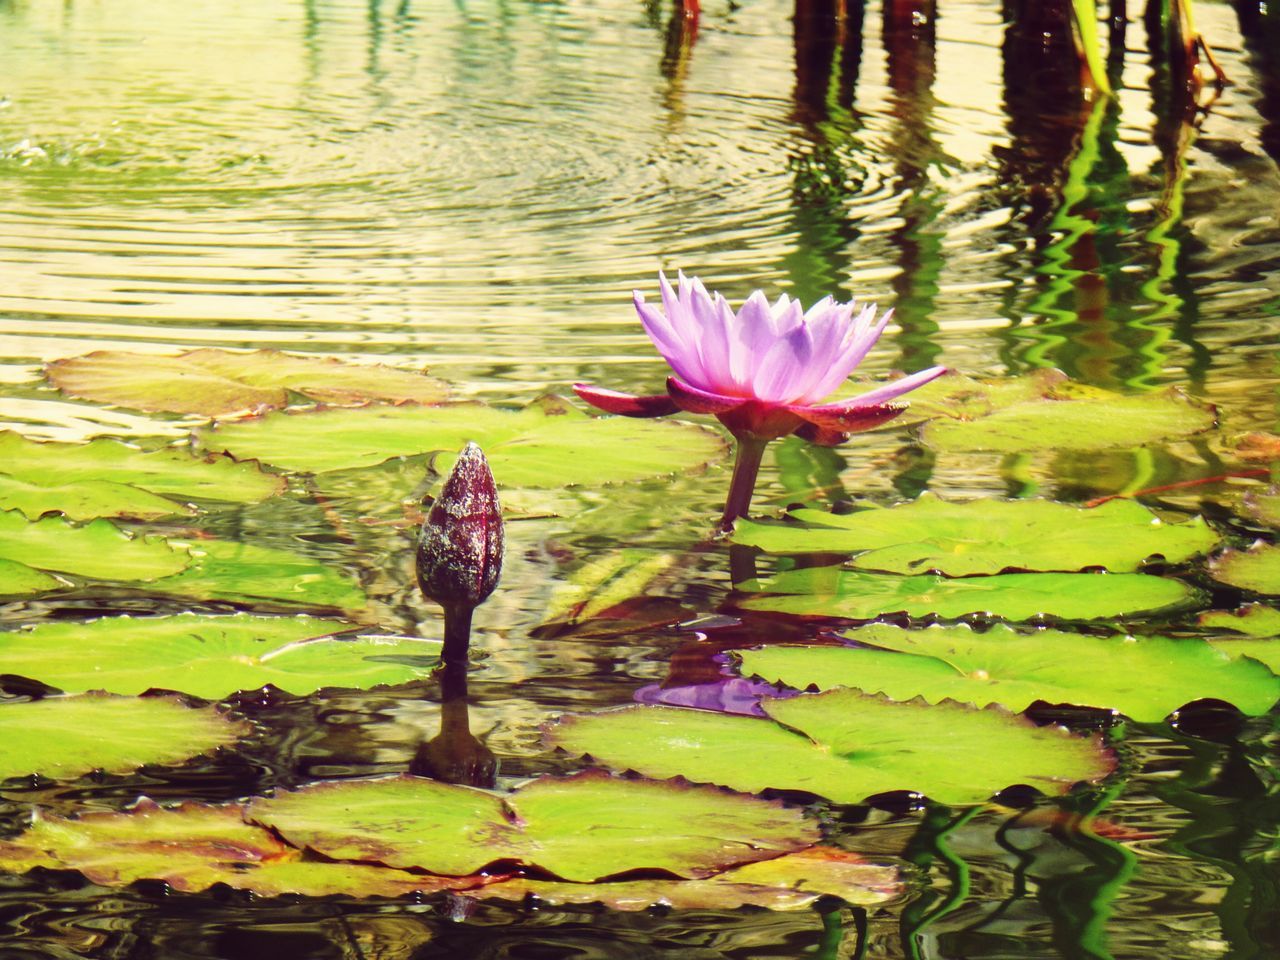 water lily, flower, water, pond, petal, lotus water lily, leaf, freshness, lake, beauty in nature, growth, nature, floating on water, fragility, plant, flower head, pink color, single flower, reflection, green color